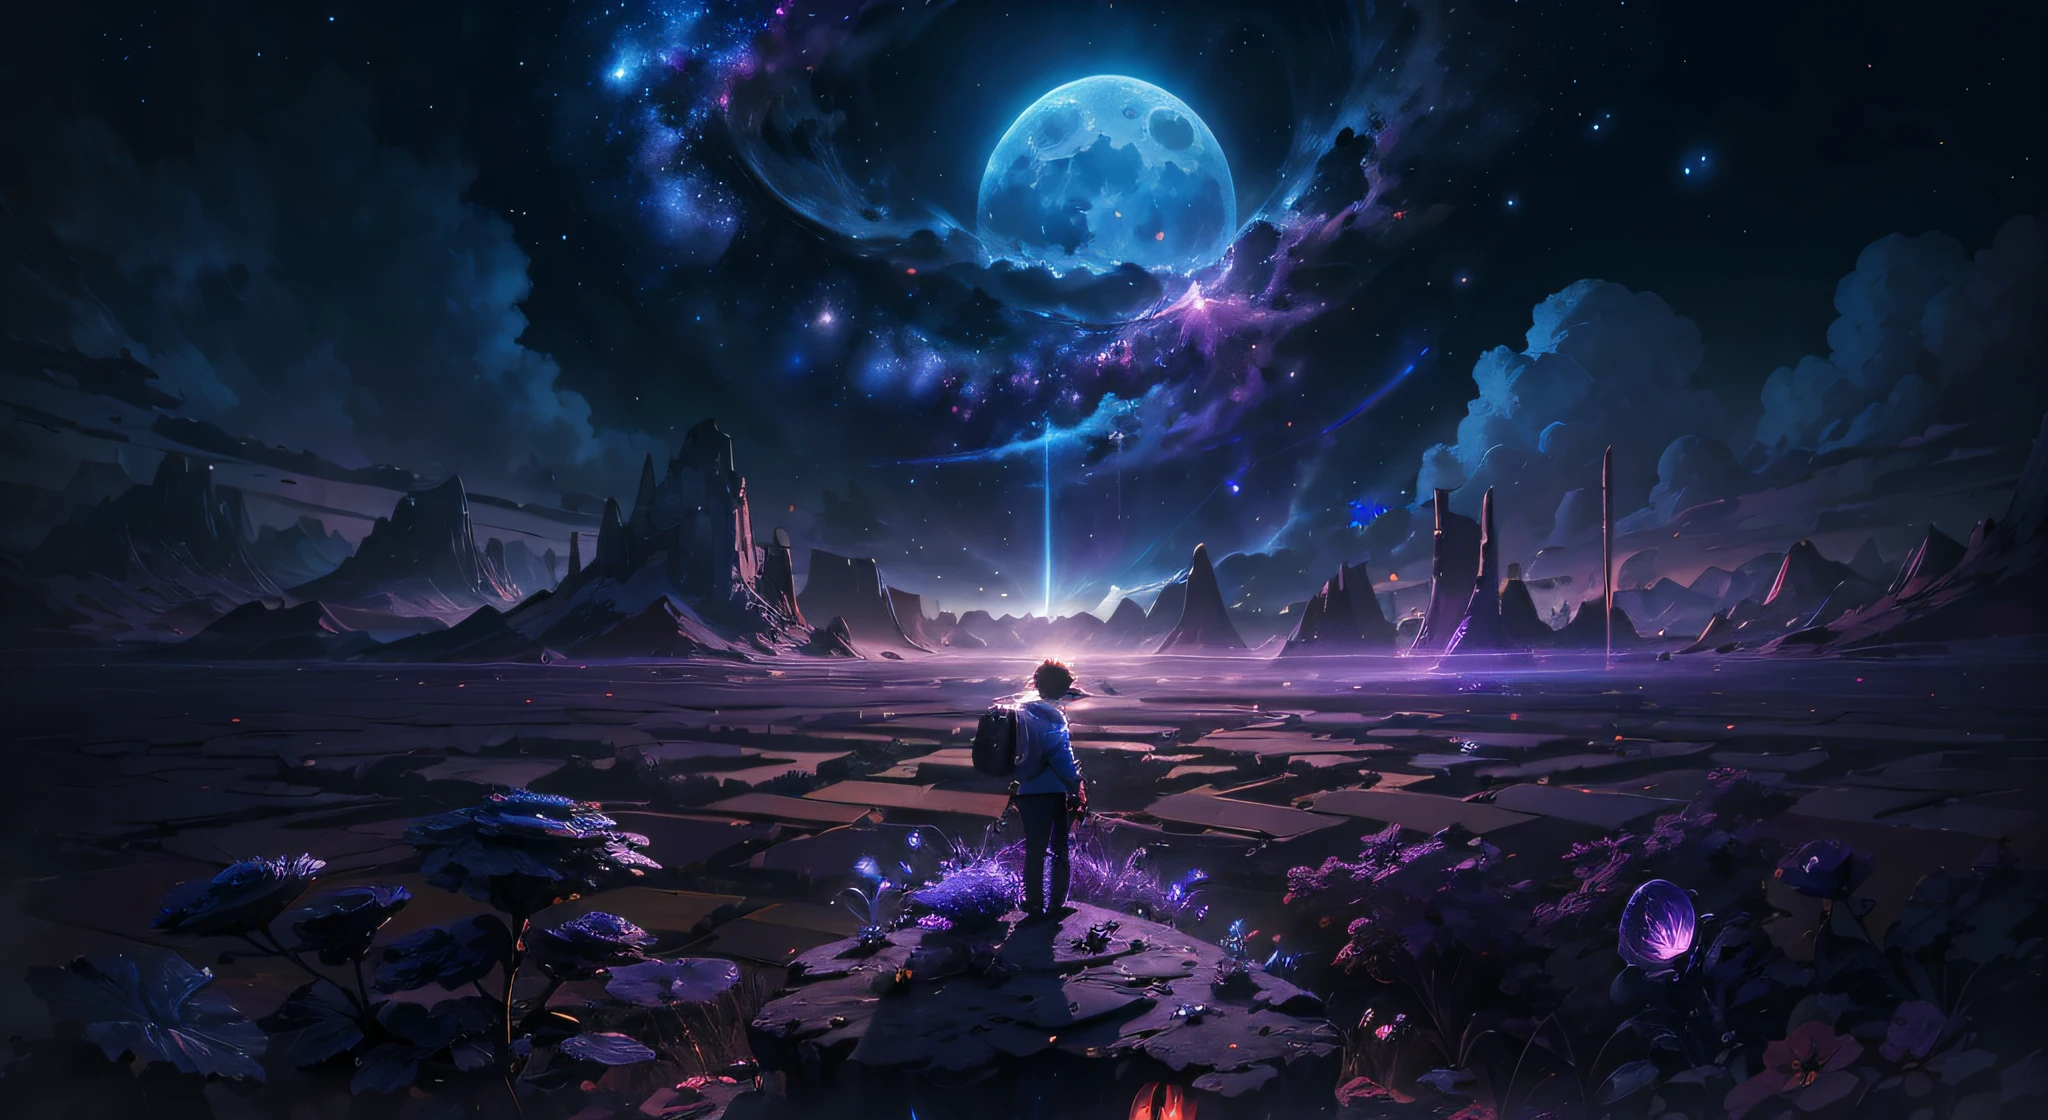 expansive landscape photograph , (a view from below that shows sky above and open field below), a boy standing on flower field looking up, (full moon:1.2), ( shooting stars:0.9), (nebula:1.3), distant mountain, tree BREAK
production art, (warm light source:1.2), (Firefly:1.2), lamp, lot of purple and orange, intricate details, volumetric lighting, realism BREAK
(masterpiece:1.2), (best quality), 4k, ultra-detailed, (dynamic composition:1.4), highly detailed, colorful details,( iridescent colors:1.2), (glowing lighting, atmospheric lighting), dreamy, magical, (solo:1.2), super detail, best finishing